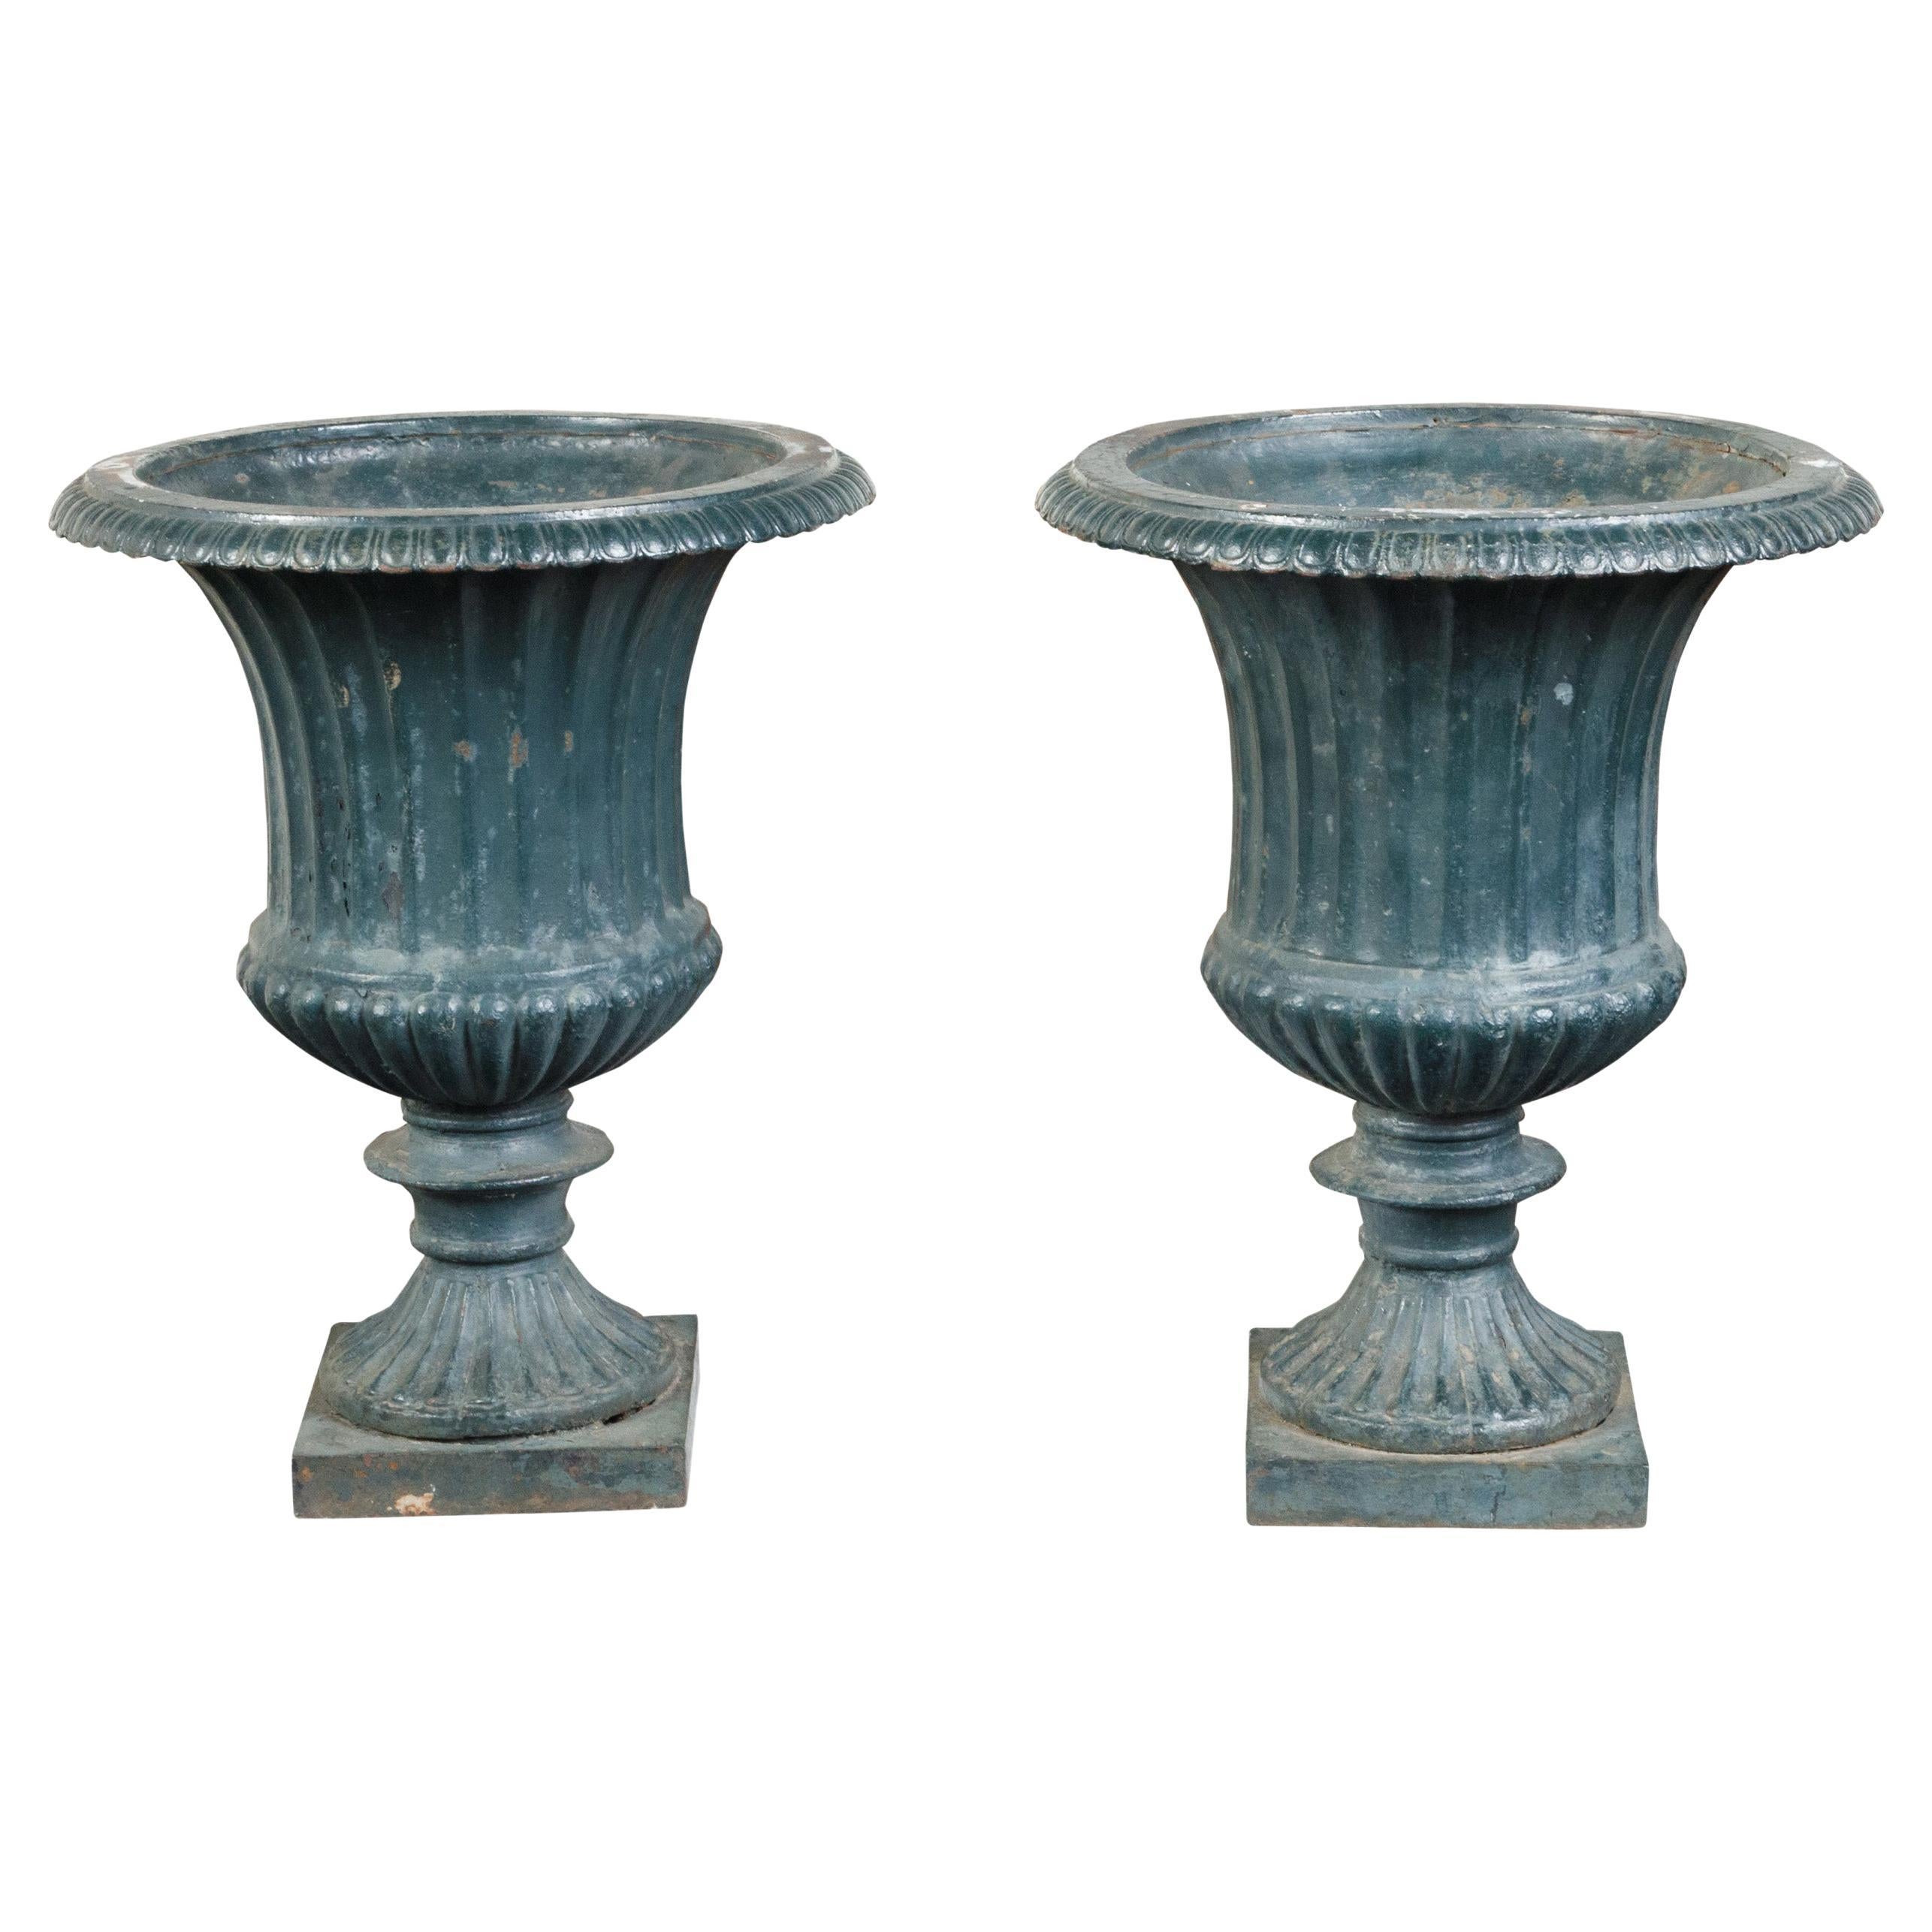 Pair of 19th Century English Medici Urn Planters on Petite Square Bases